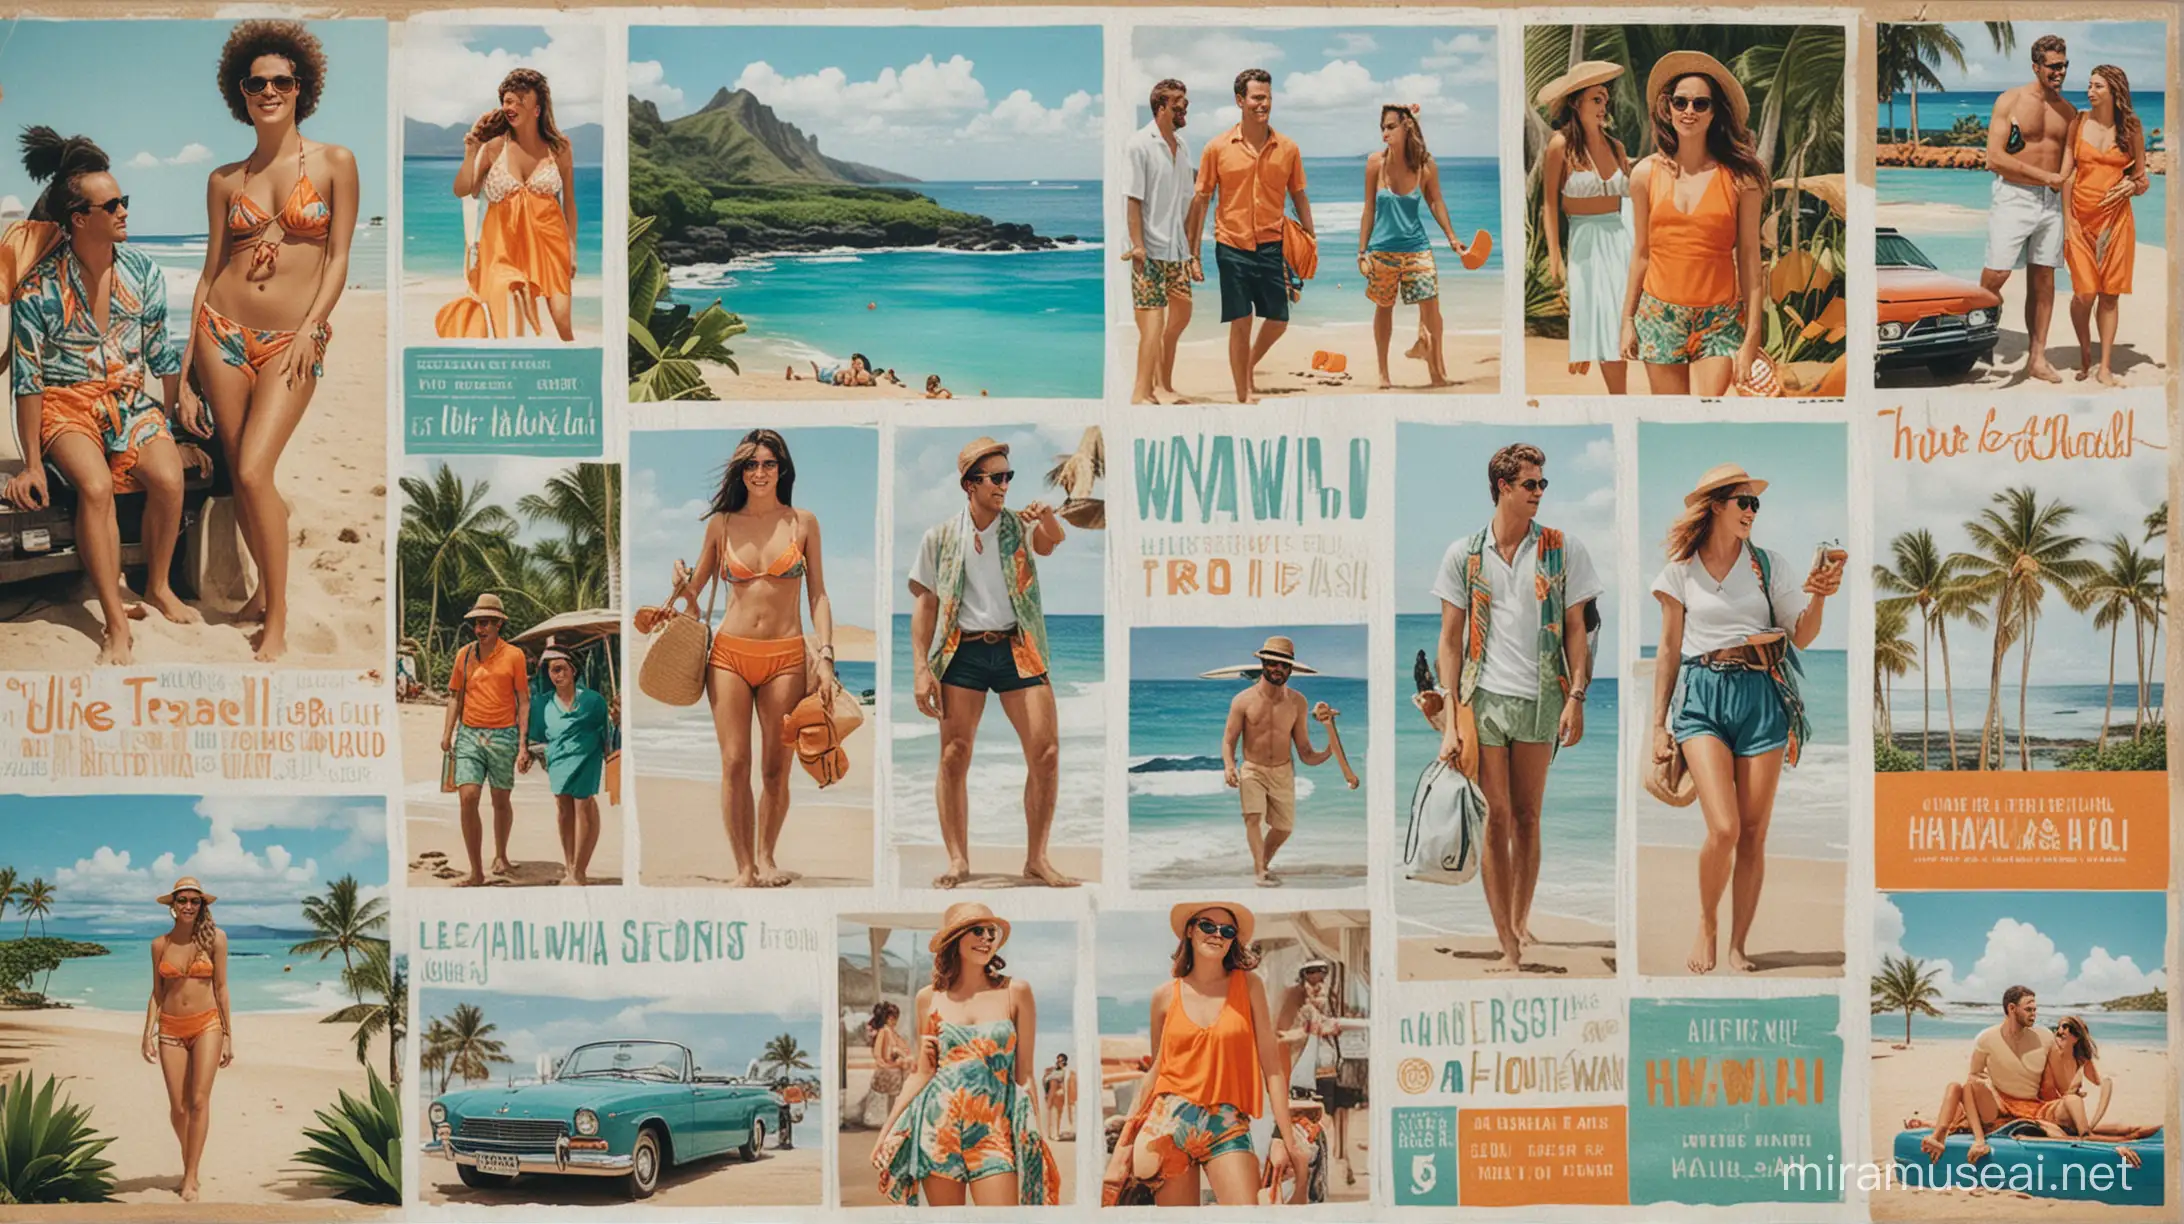 moodboard for travel to hawaii use blue green and orange colours with typography and colour palette. Let a woman and a man tourist too.